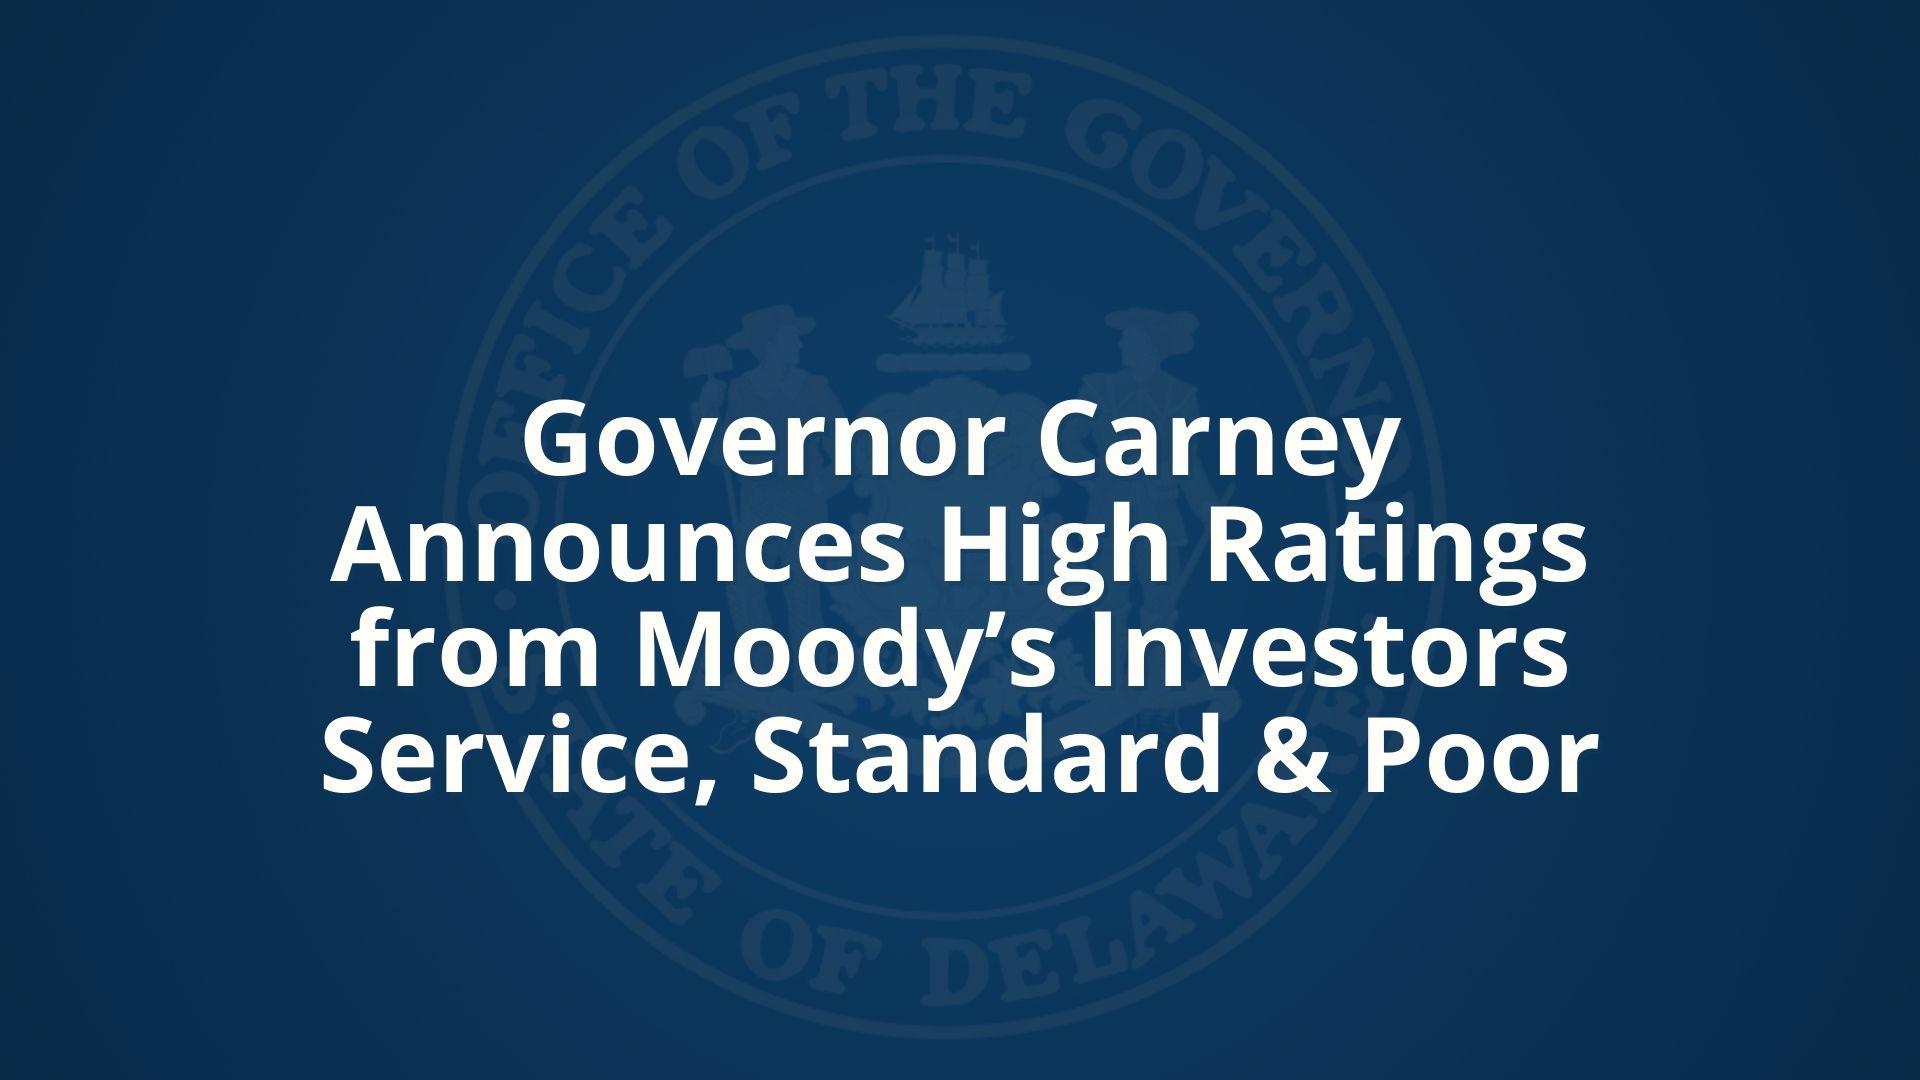 Governor Carney Announces High Ratings from Moody’s Investors Service, Standard & Poor